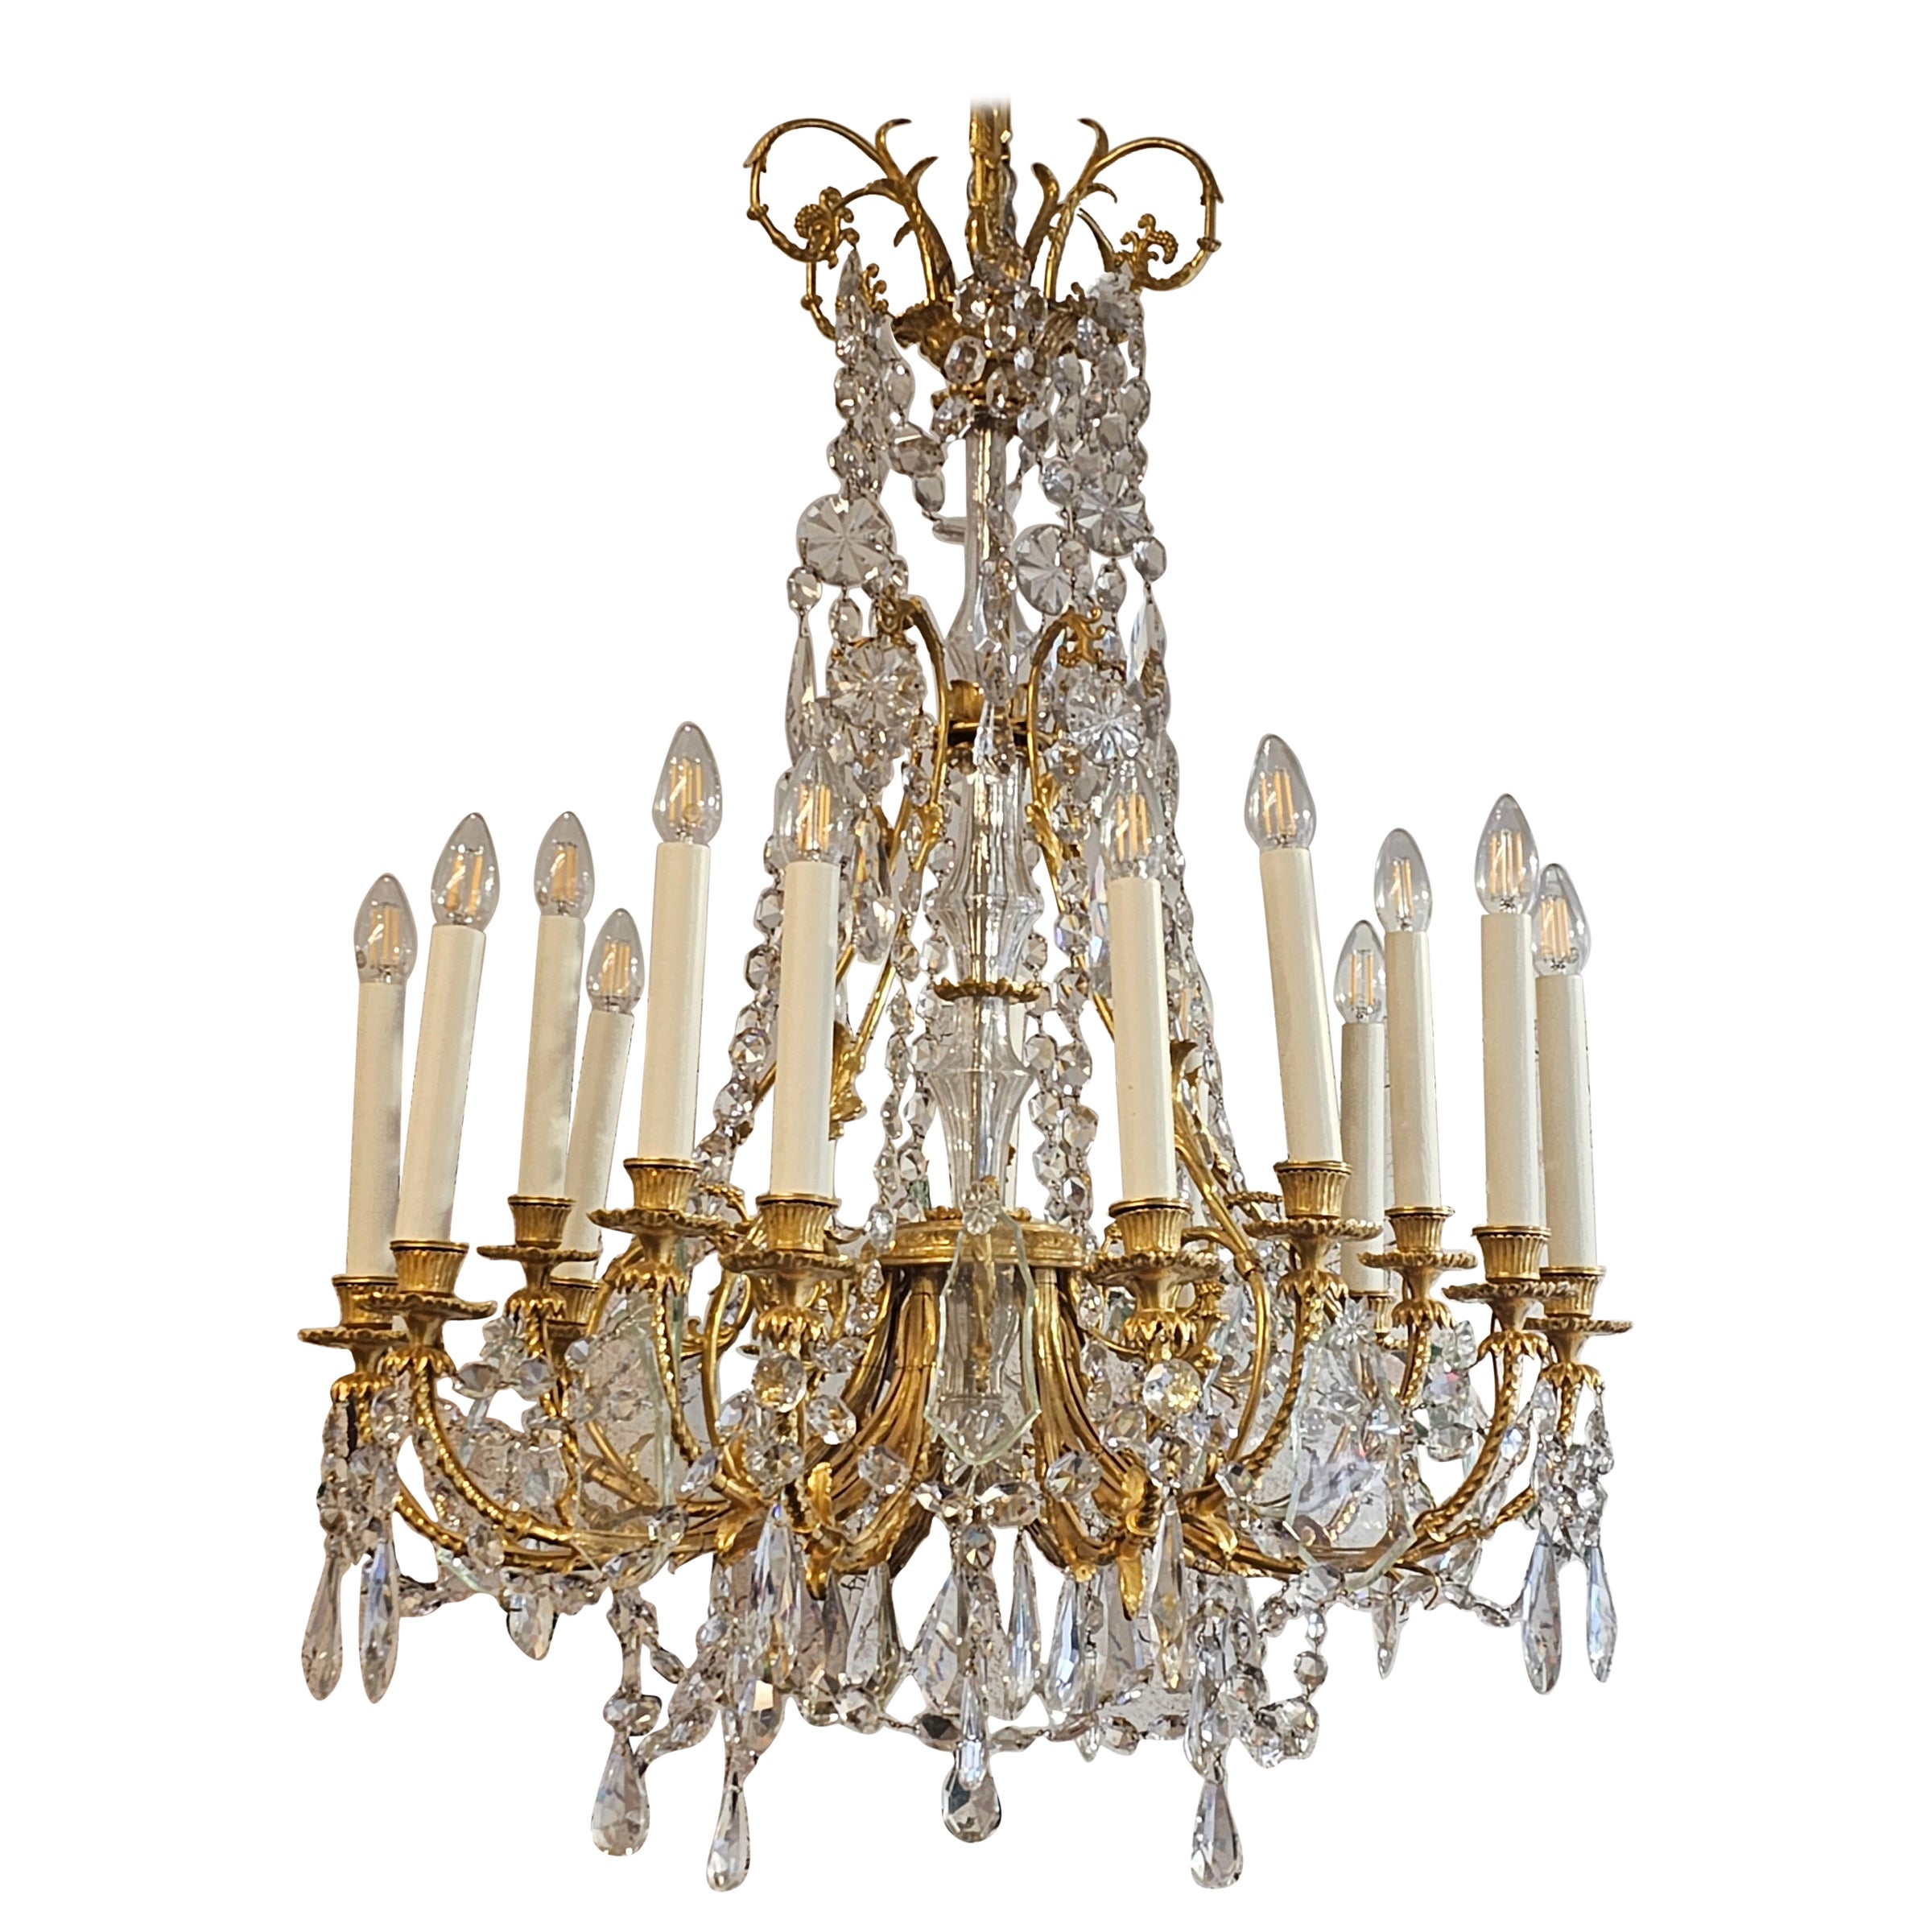 French 19th Century Louis XVI Style Fifteen Light Baccarat Crystal Chandelier For Sale